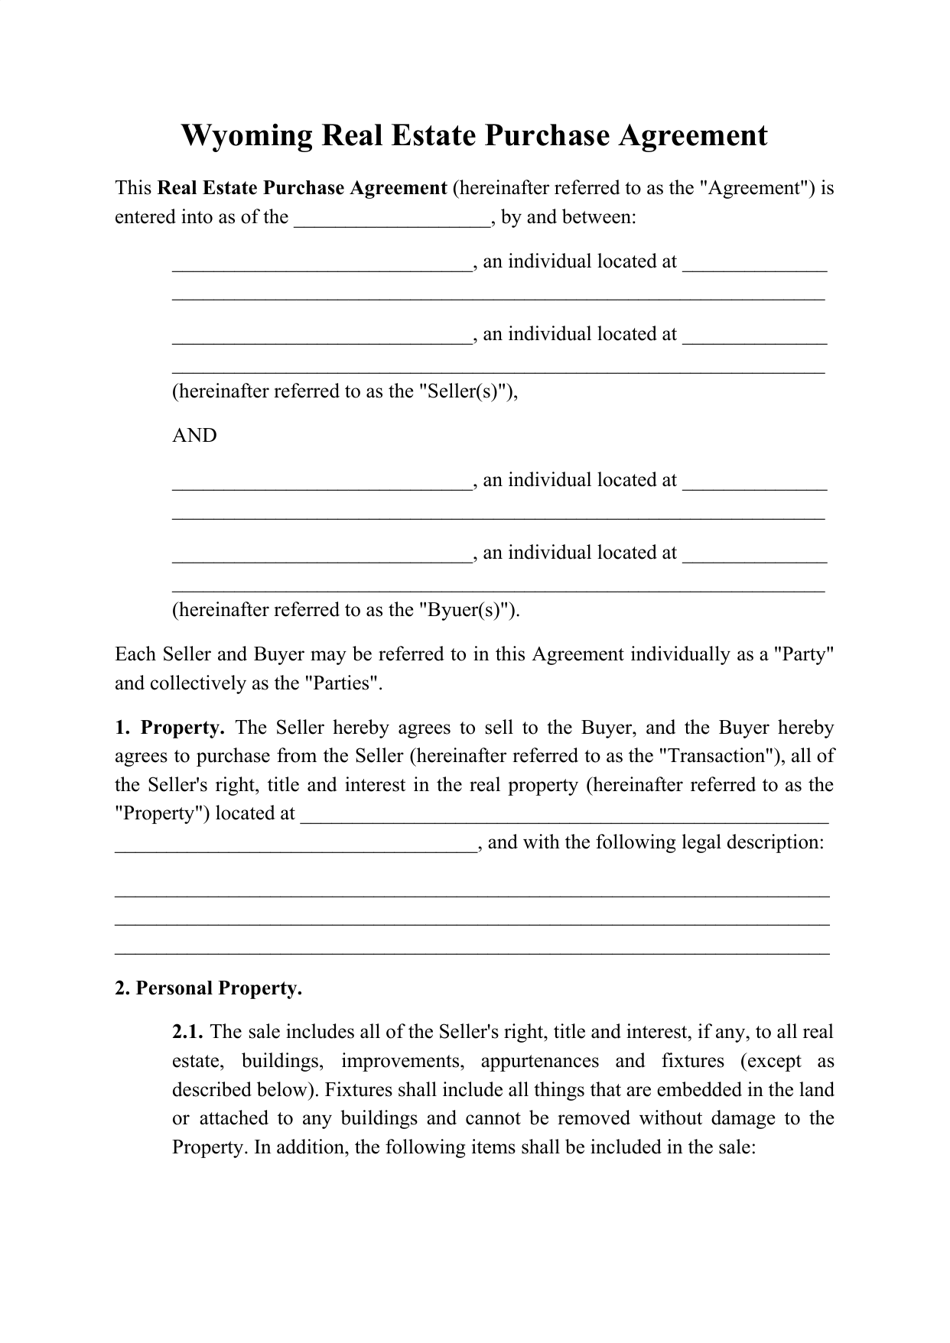 Real Estate Purchase Agreement Template - Wyoming, Page 1